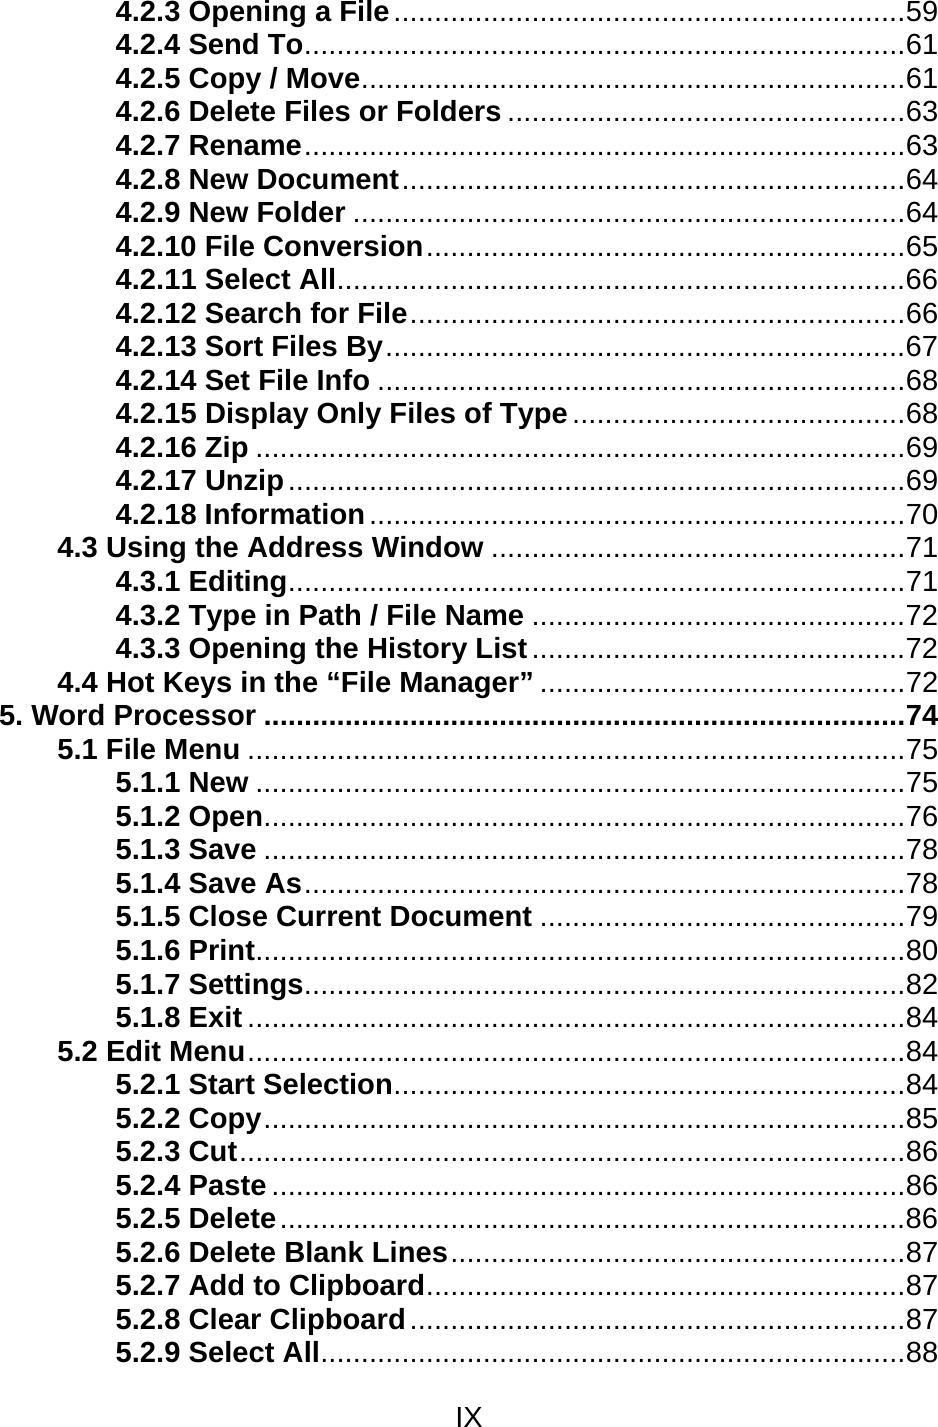 IX  4.2.3 Opening a File...............................................................59 4.2.4 Send To..........................................................................61 4.2.5 Copy / Move...................................................................61 4.2.6 Delete Files or Folders .................................................63 4.2.7 Rename..........................................................................63 4.2.8 New Document..............................................................64 4.2.9 New Folder ....................................................................64 4.2.10 File Conversion...........................................................65 4.2.11 Select All......................................................................66 4.2.12 Search for File.............................................................66 4.2.13 Sort Files By................................................................67 4.2.14 Set File Info .................................................................68 4.2.15 Display Only Files of Type.........................................68 4.2.16 Zip ................................................................................69 4.2.17 Unzip............................................................................69 4.2.18 Information..................................................................70 4.3 Using the Address Window ...................................................71 4.3.1 Editing............................................................................71 4.3.2 Type in Path / File Name ..............................................72 4.3.3 Opening the History List..............................................72 4.4 Hot Keys in the “File Manager” .............................................72 5. Word Processor ...............................................................................74 5.1 File Menu .................................................................................75 5.1.1 New ................................................................................75 5.1.2 Open...............................................................................76 5.1.3 Save ...............................................................................78 5.1.4 Save As..........................................................................78 5.1.5 Close Current Document .............................................79 5.1.6 Print................................................................................80 5.1.7 Settings..........................................................................82 5.1.8 Exit .................................................................................84 5.2 Edit Menu.................................................................................84 5.2.1 Start Selection...............................................................84 5.2.2 Copy...............................................................................85 5.2.3 Cut..................................................................................86 5.2.4 Paste ..............................................................................86 5.2.5 Delete.............................................................................86 5.2.6 Delete Blank Lines........................................................87 5.2.7 Add to Clipboard...........................................................87 5.2.8 Clear Clipboard.............................................................87 5.2.9 Select All........................................................................88 